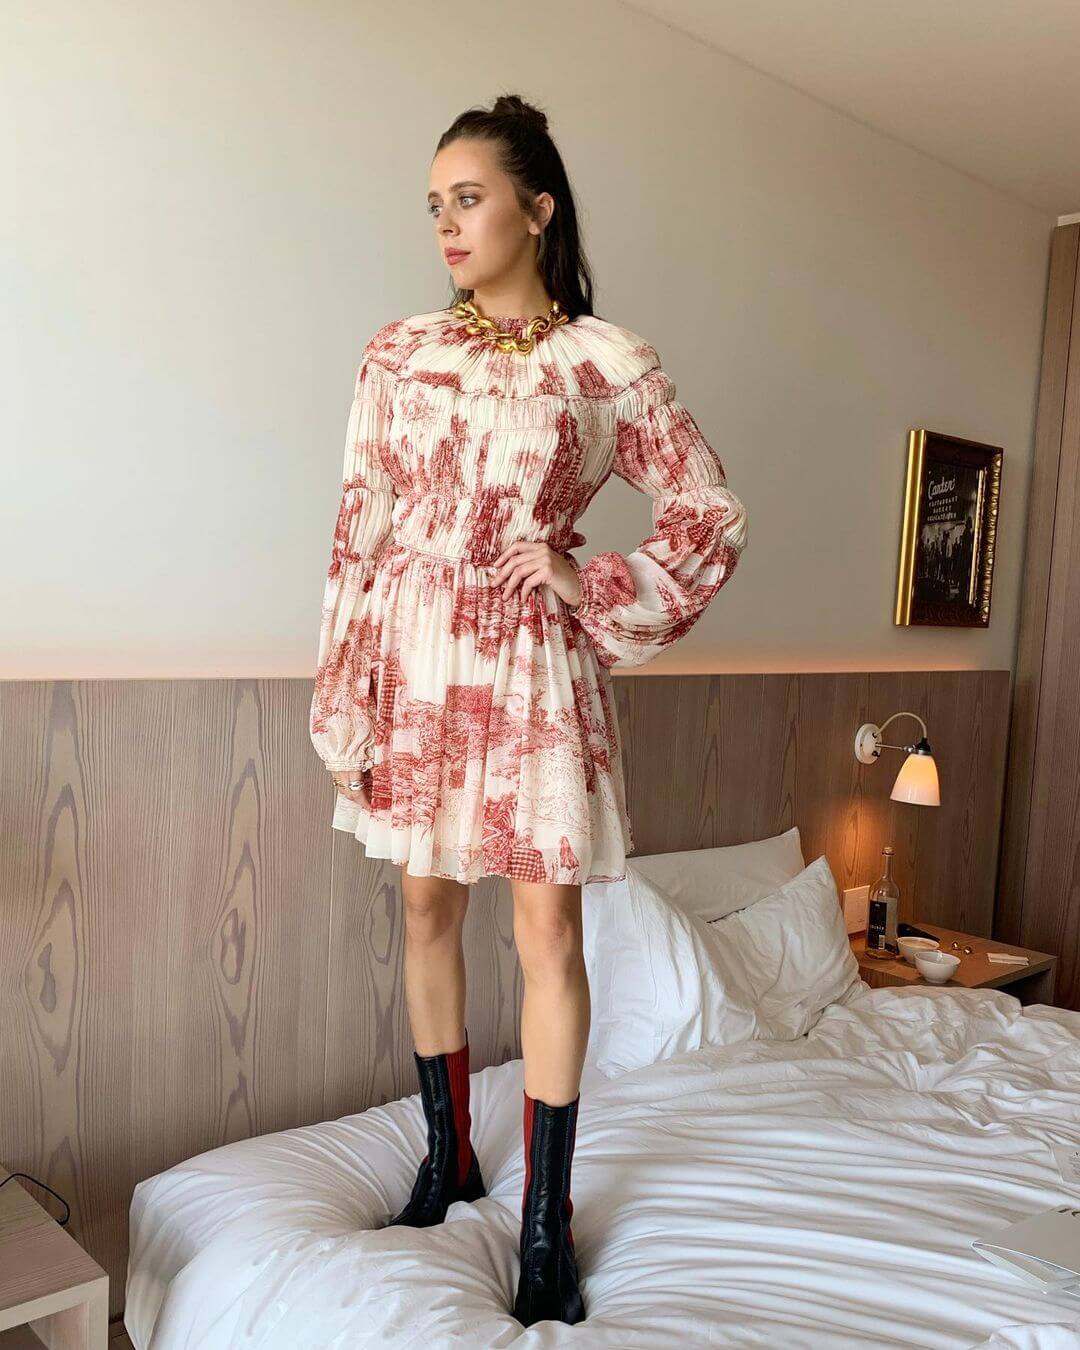 Bel Powley In Stunning Shade Cream Colored Crepe Mini Dress With Red Black Boot